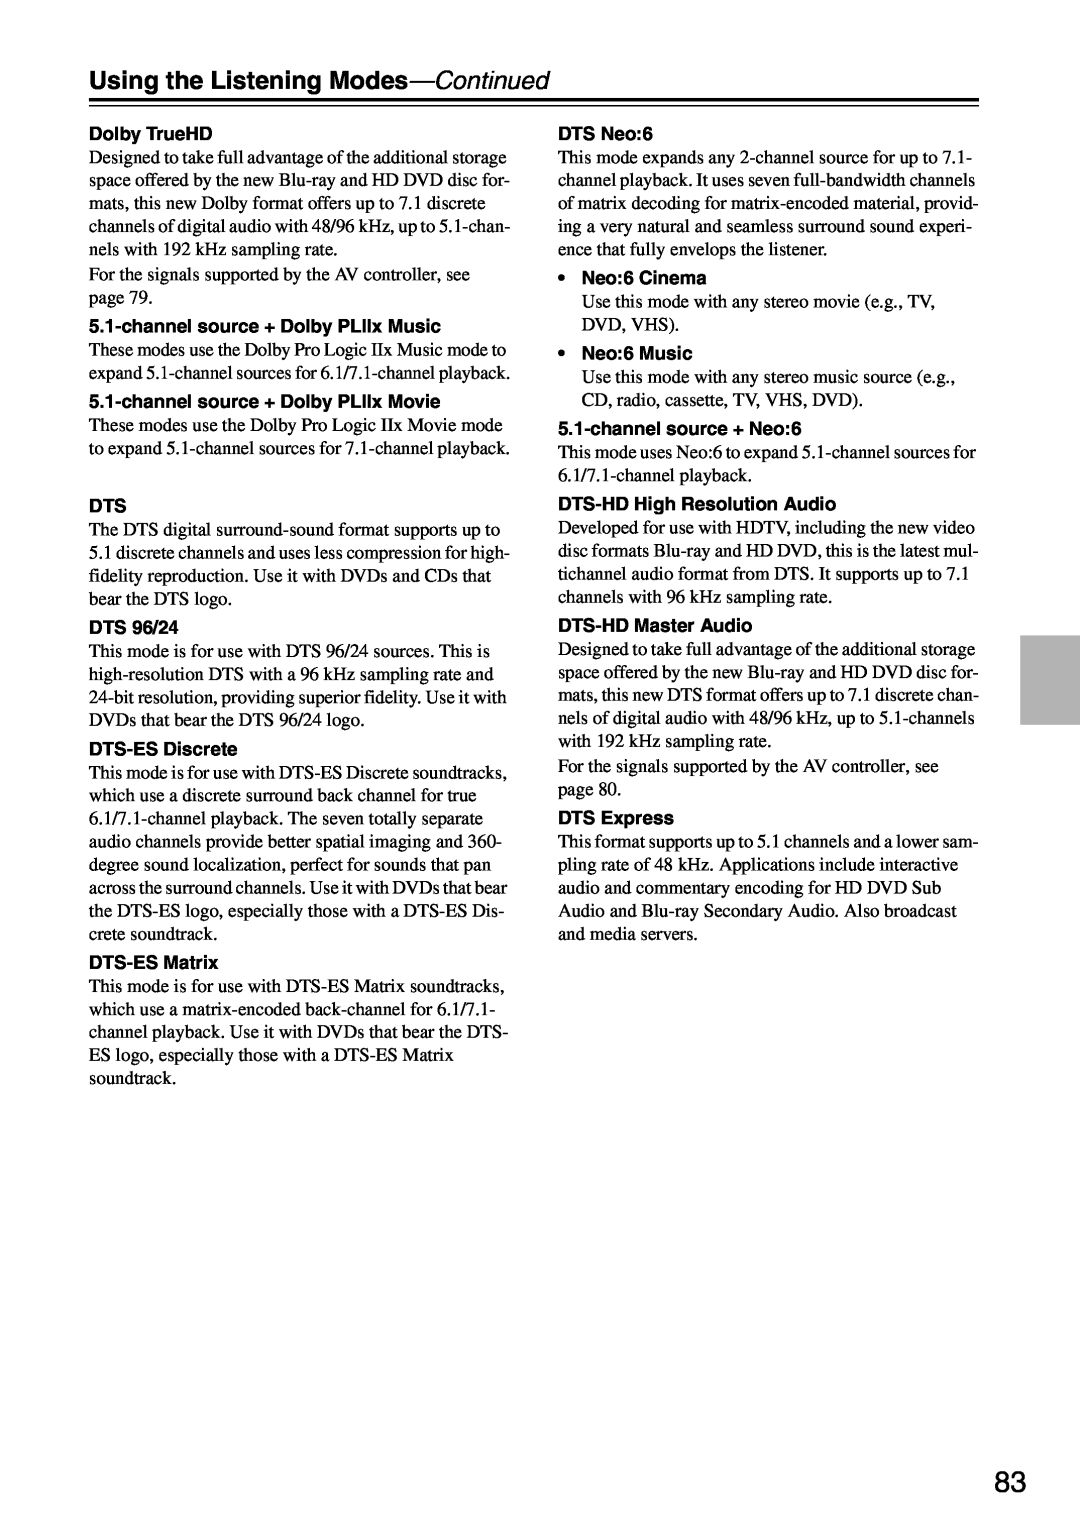 Onkyo PR-SC886 instruction manual Using the Listening Modes—Continued, Dolby TrueHD 